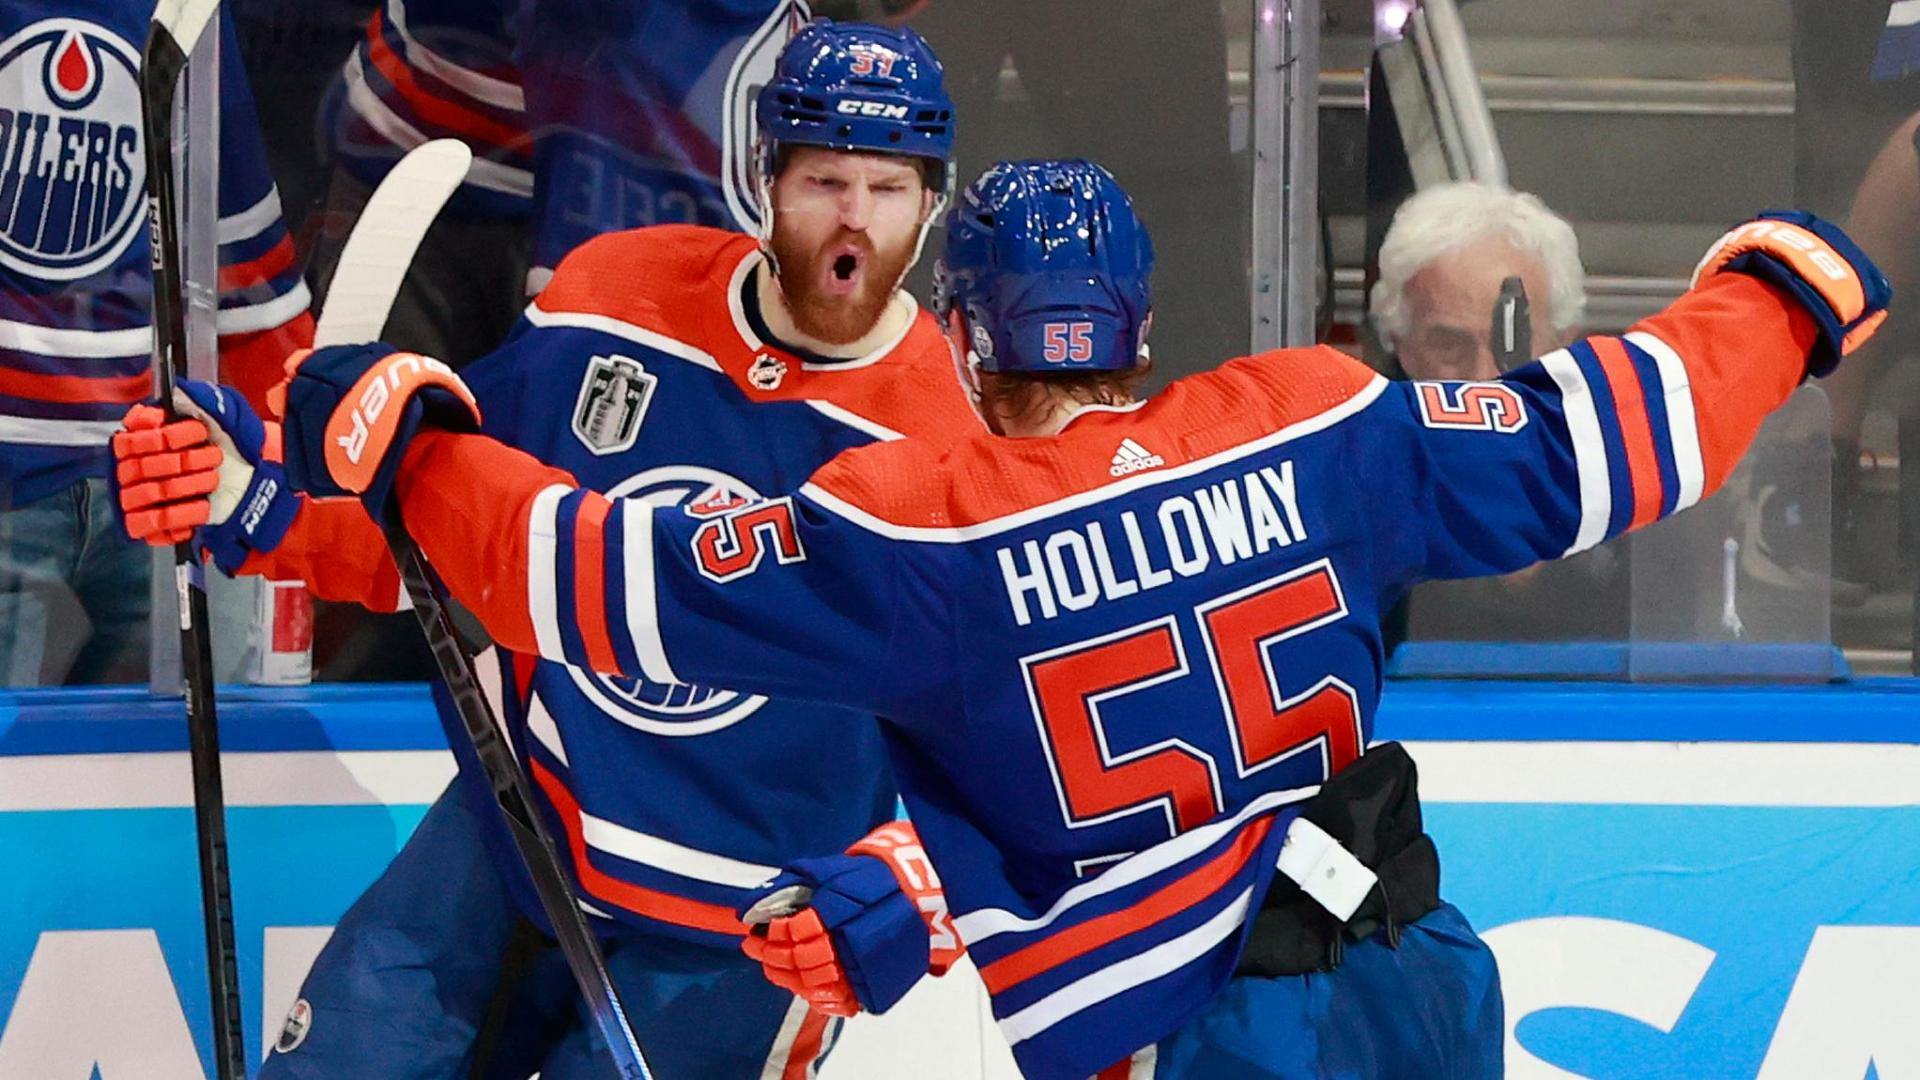 Oilers take early 1-0 lead on beautiful assist from Leon Draisaitl